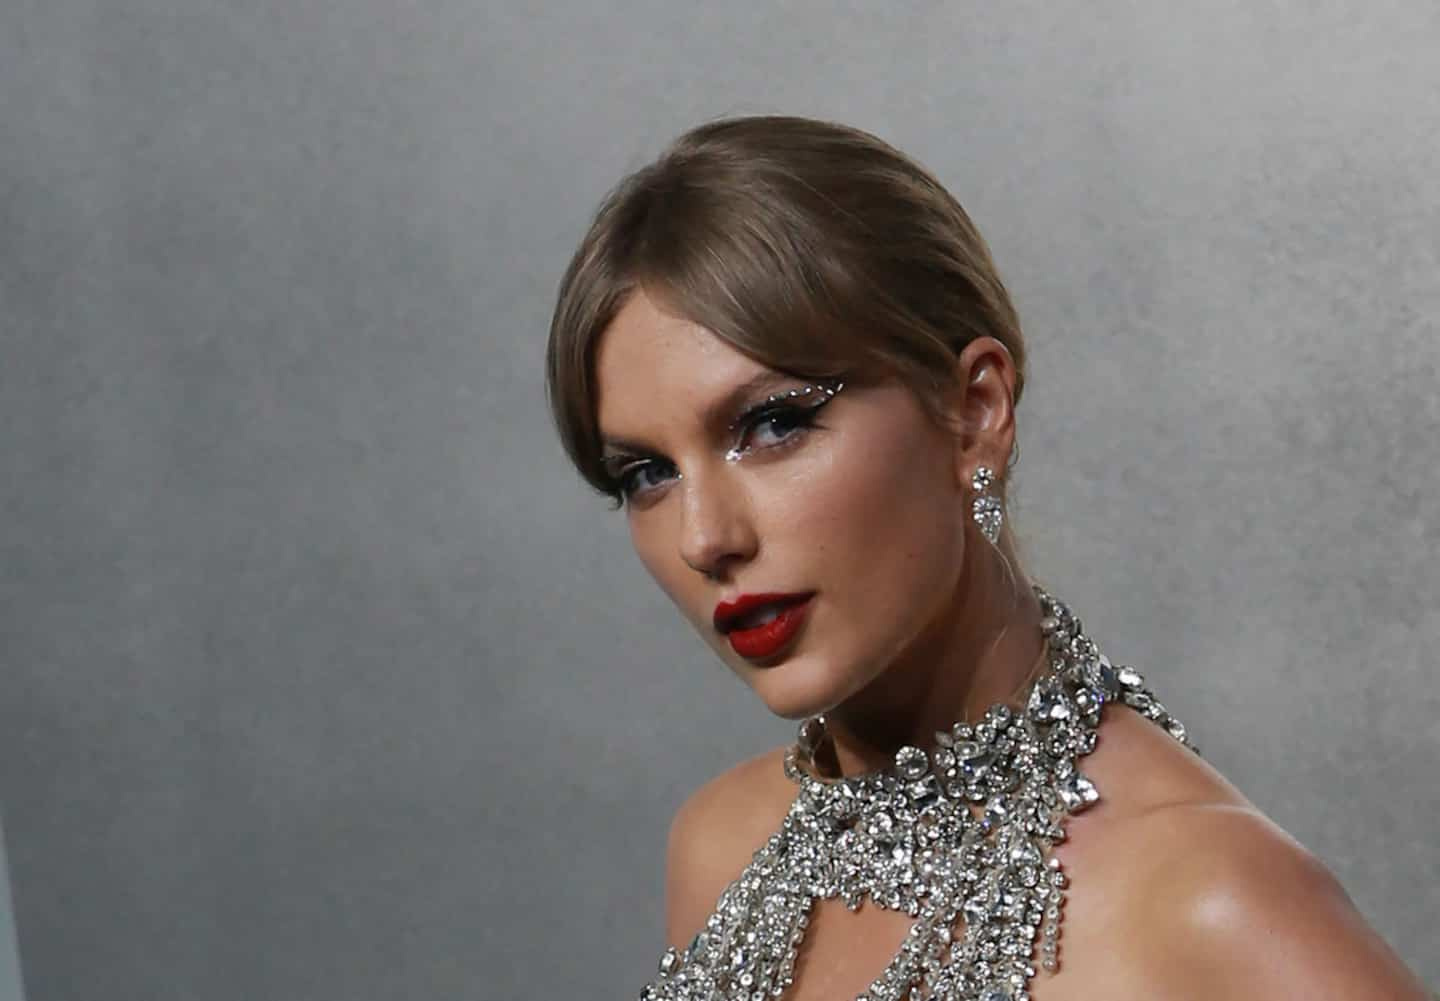 Taylor Swift Makes Music History With 'Midnights' Album